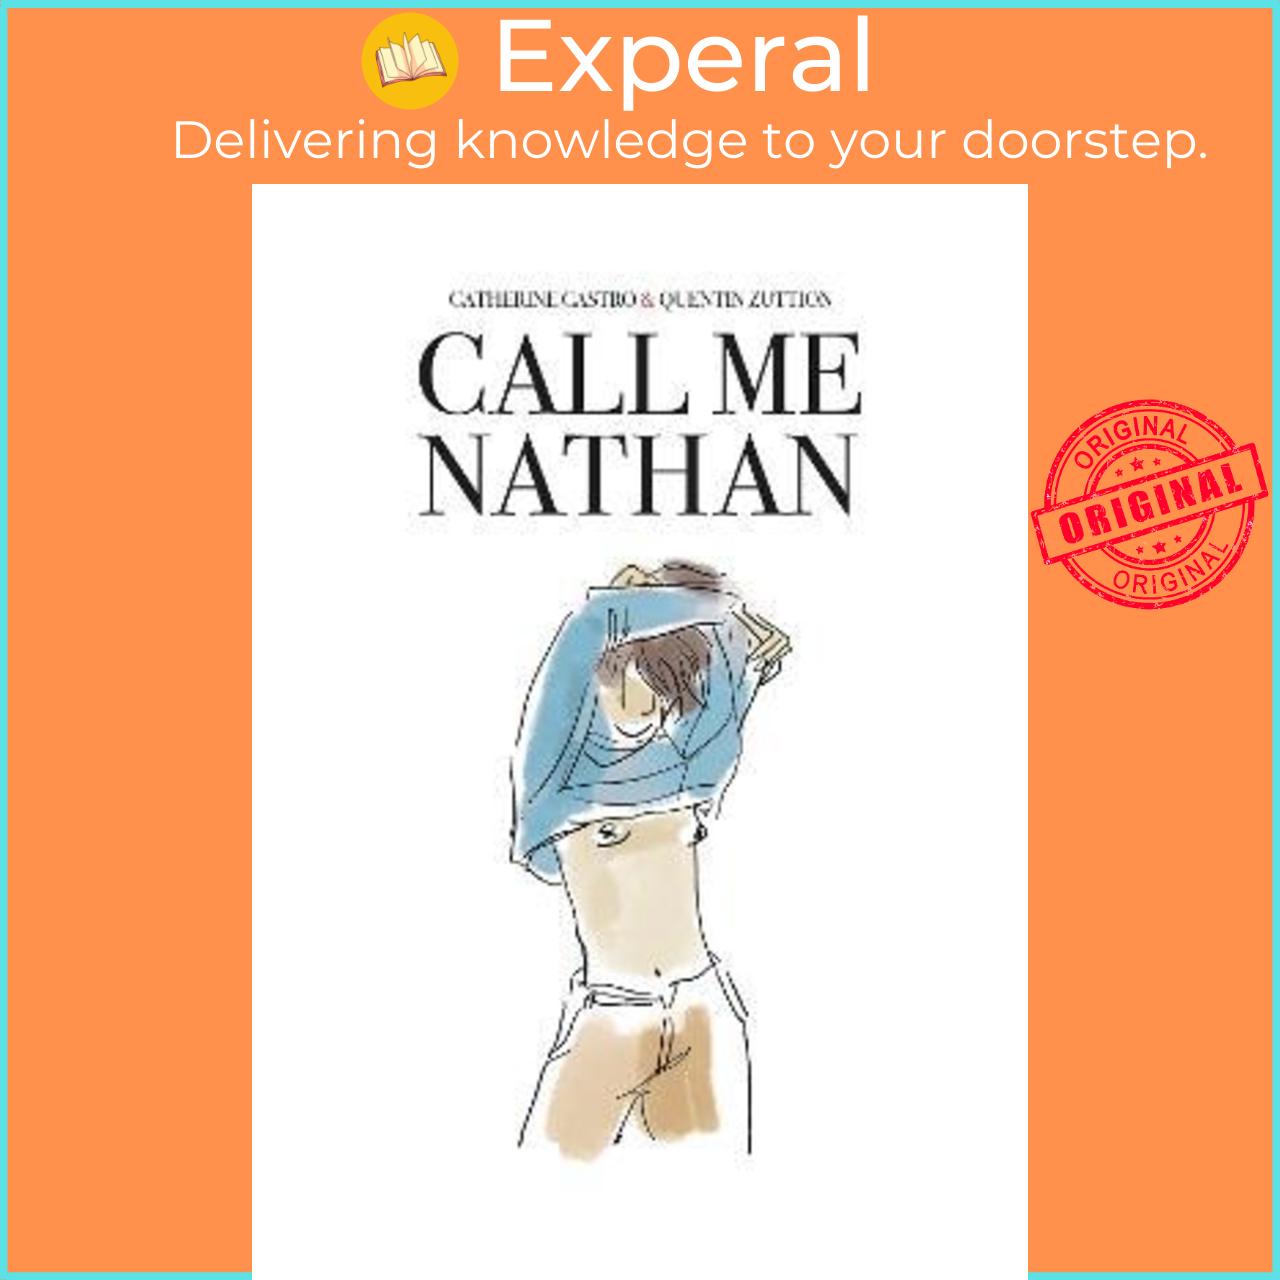 Sách - Call Me Nathan by Catherine Castro,Quentin Zuttion (UK edition, paperback)